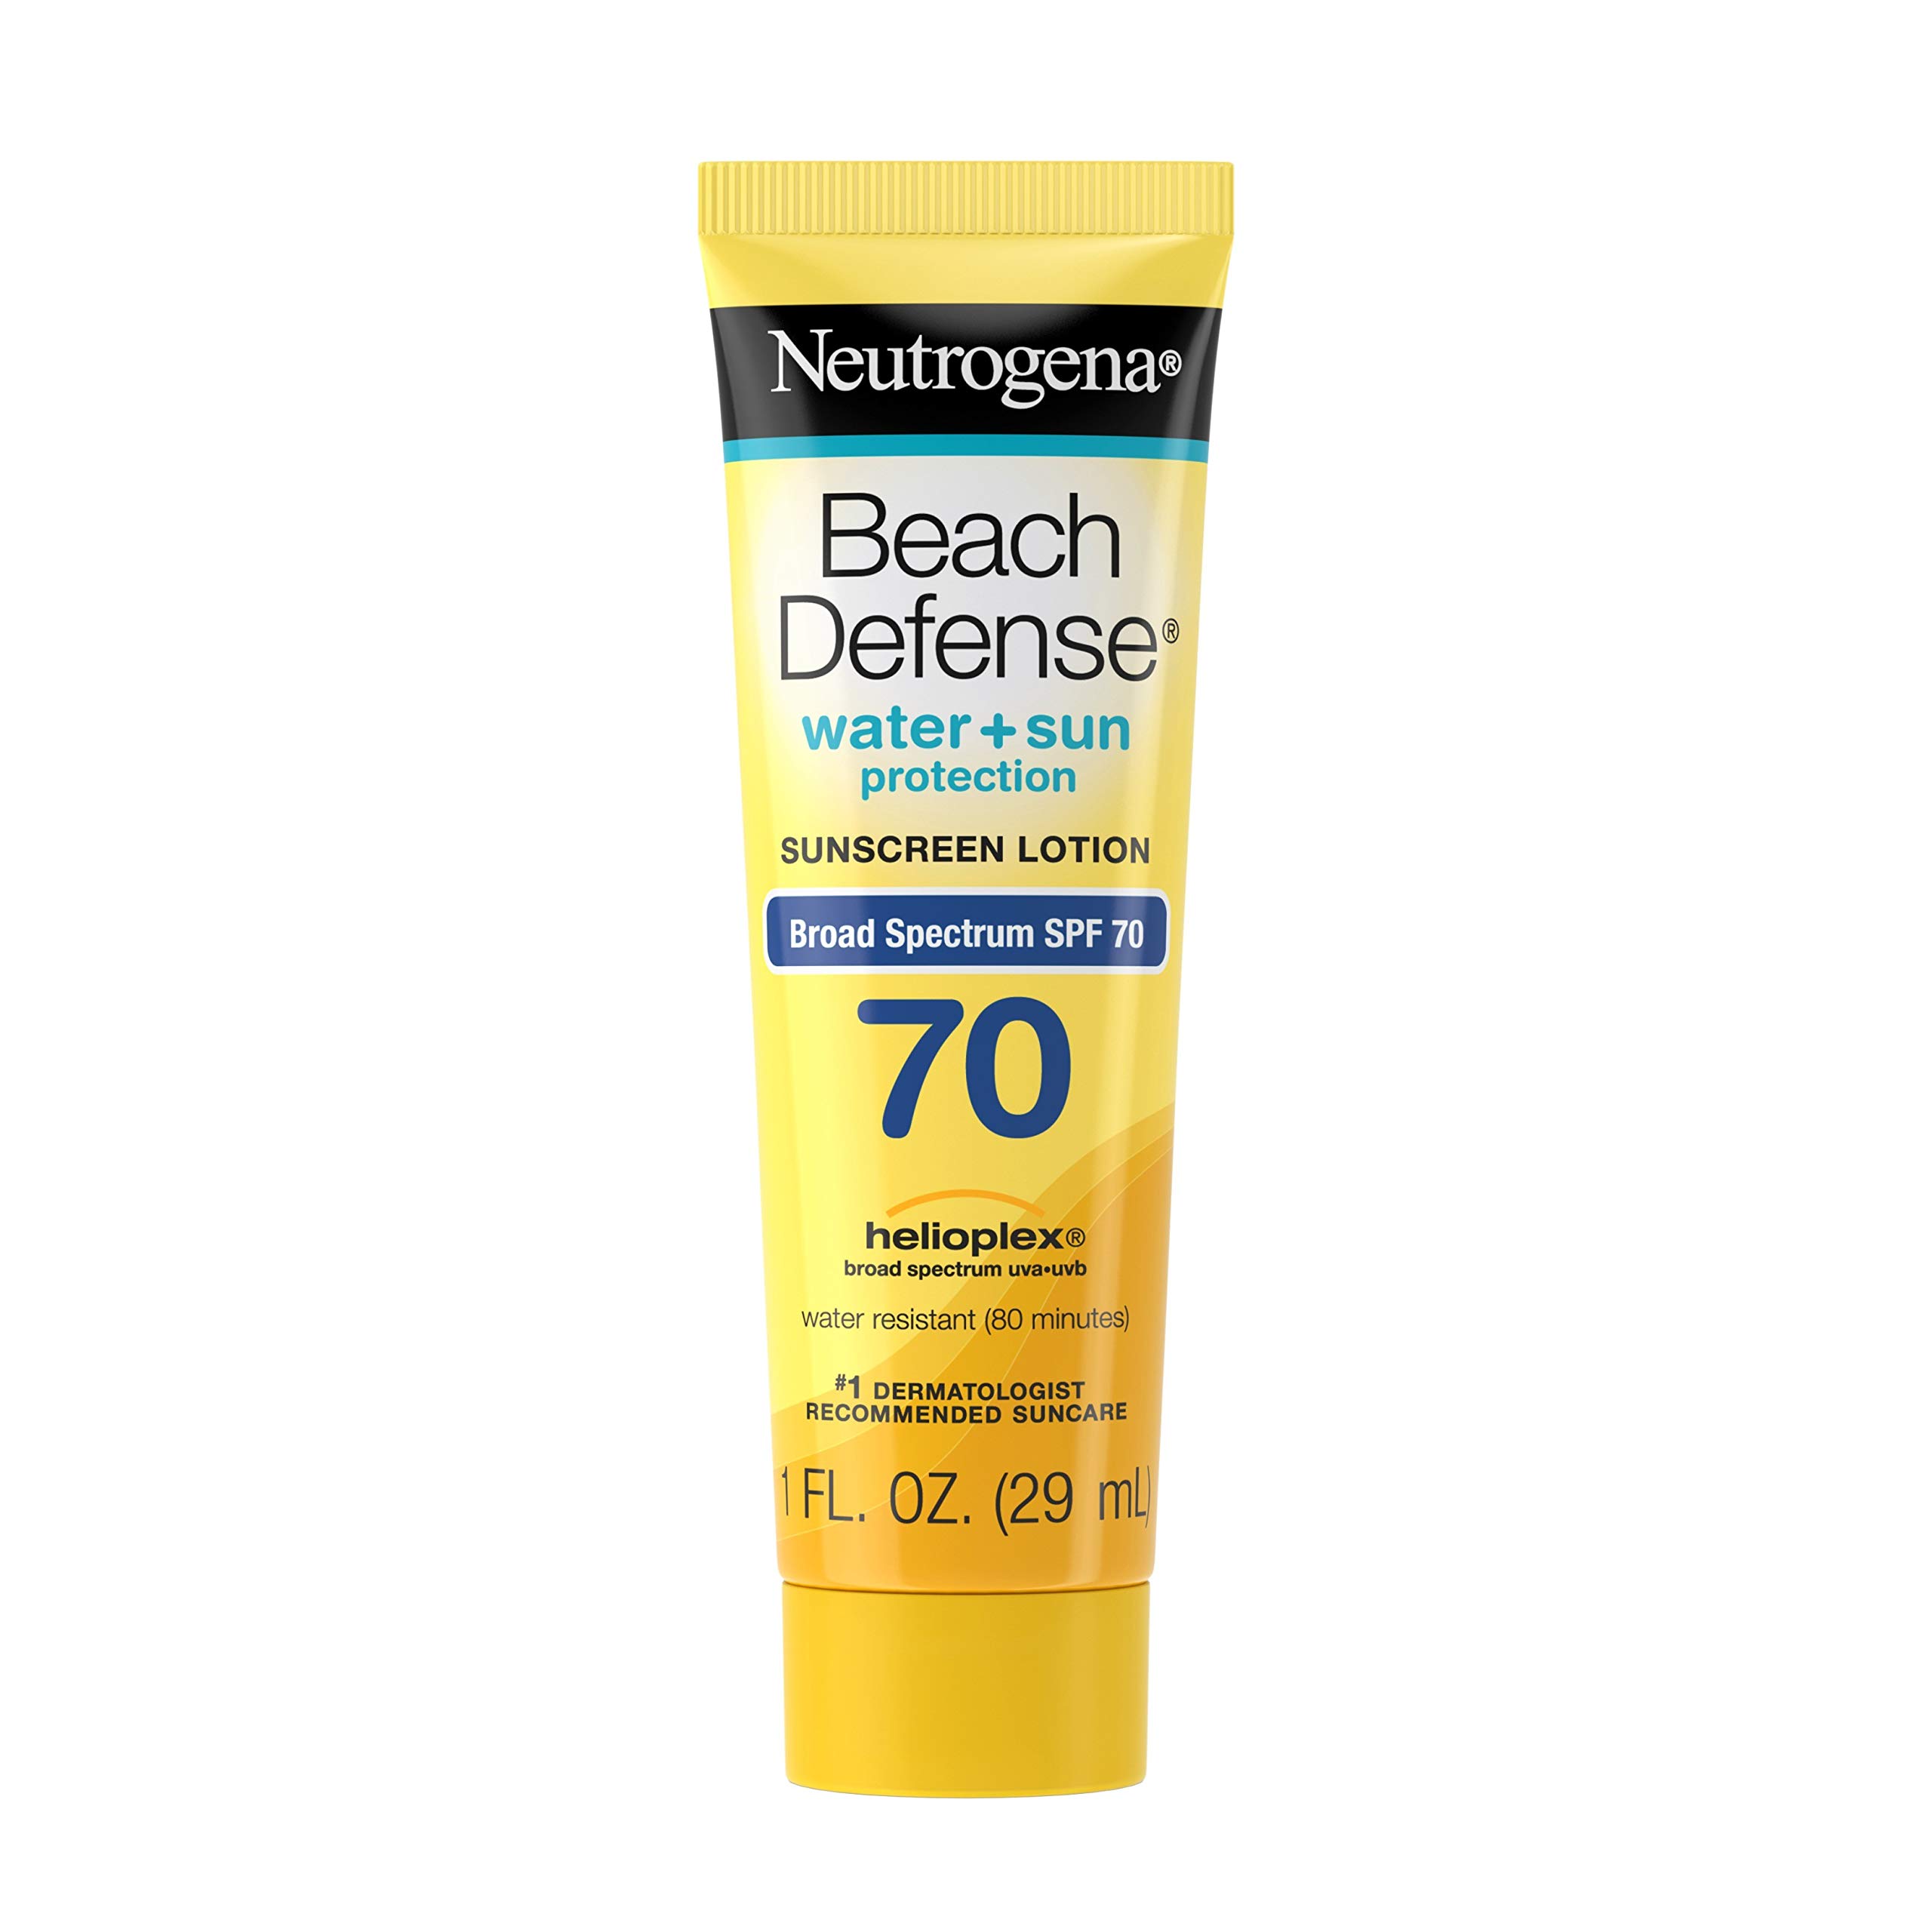 Neutrogena Beach Defense Water Resistant Sunscreen Body Lotion with Broad Spectrum SPF 70, Oil-Free and Fast-Absorbing, 1 Fl Oz (Pack of 48)